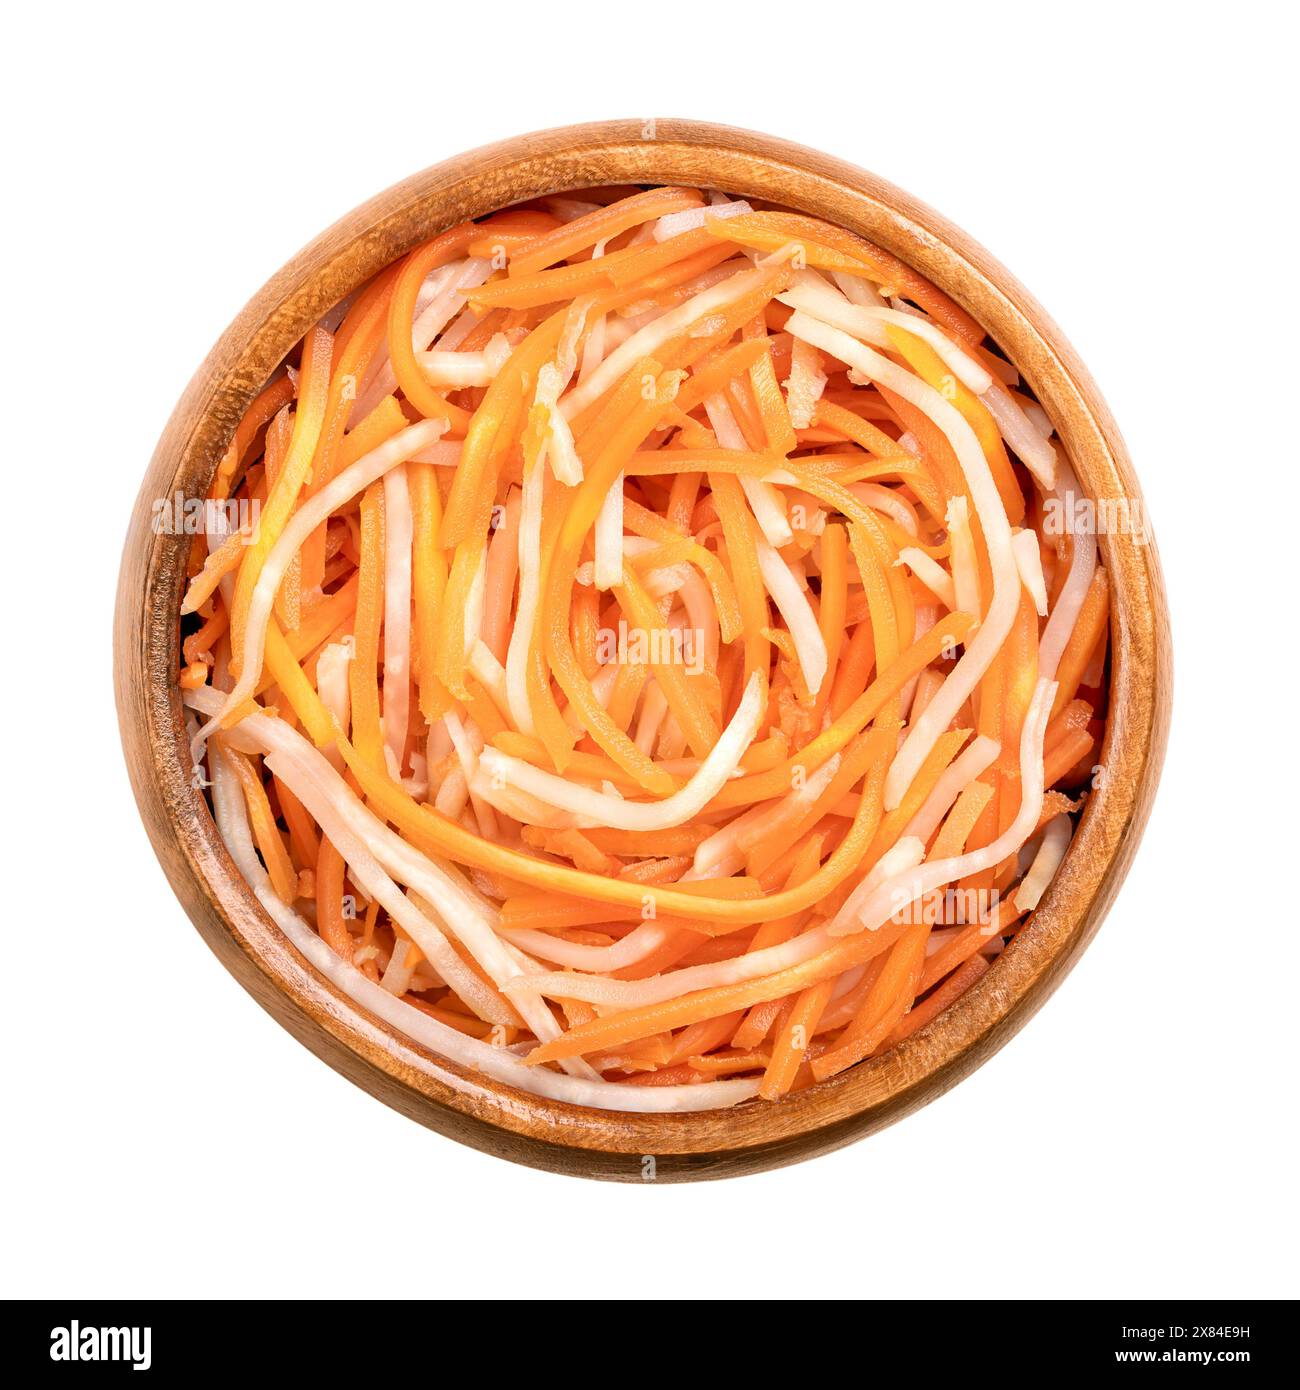 Pickled celeriac and carrot salad in a wooden bowl. Strips of celery root or knob celery, and carrot strips, pasteurized and preserved in brine. Stock Photo